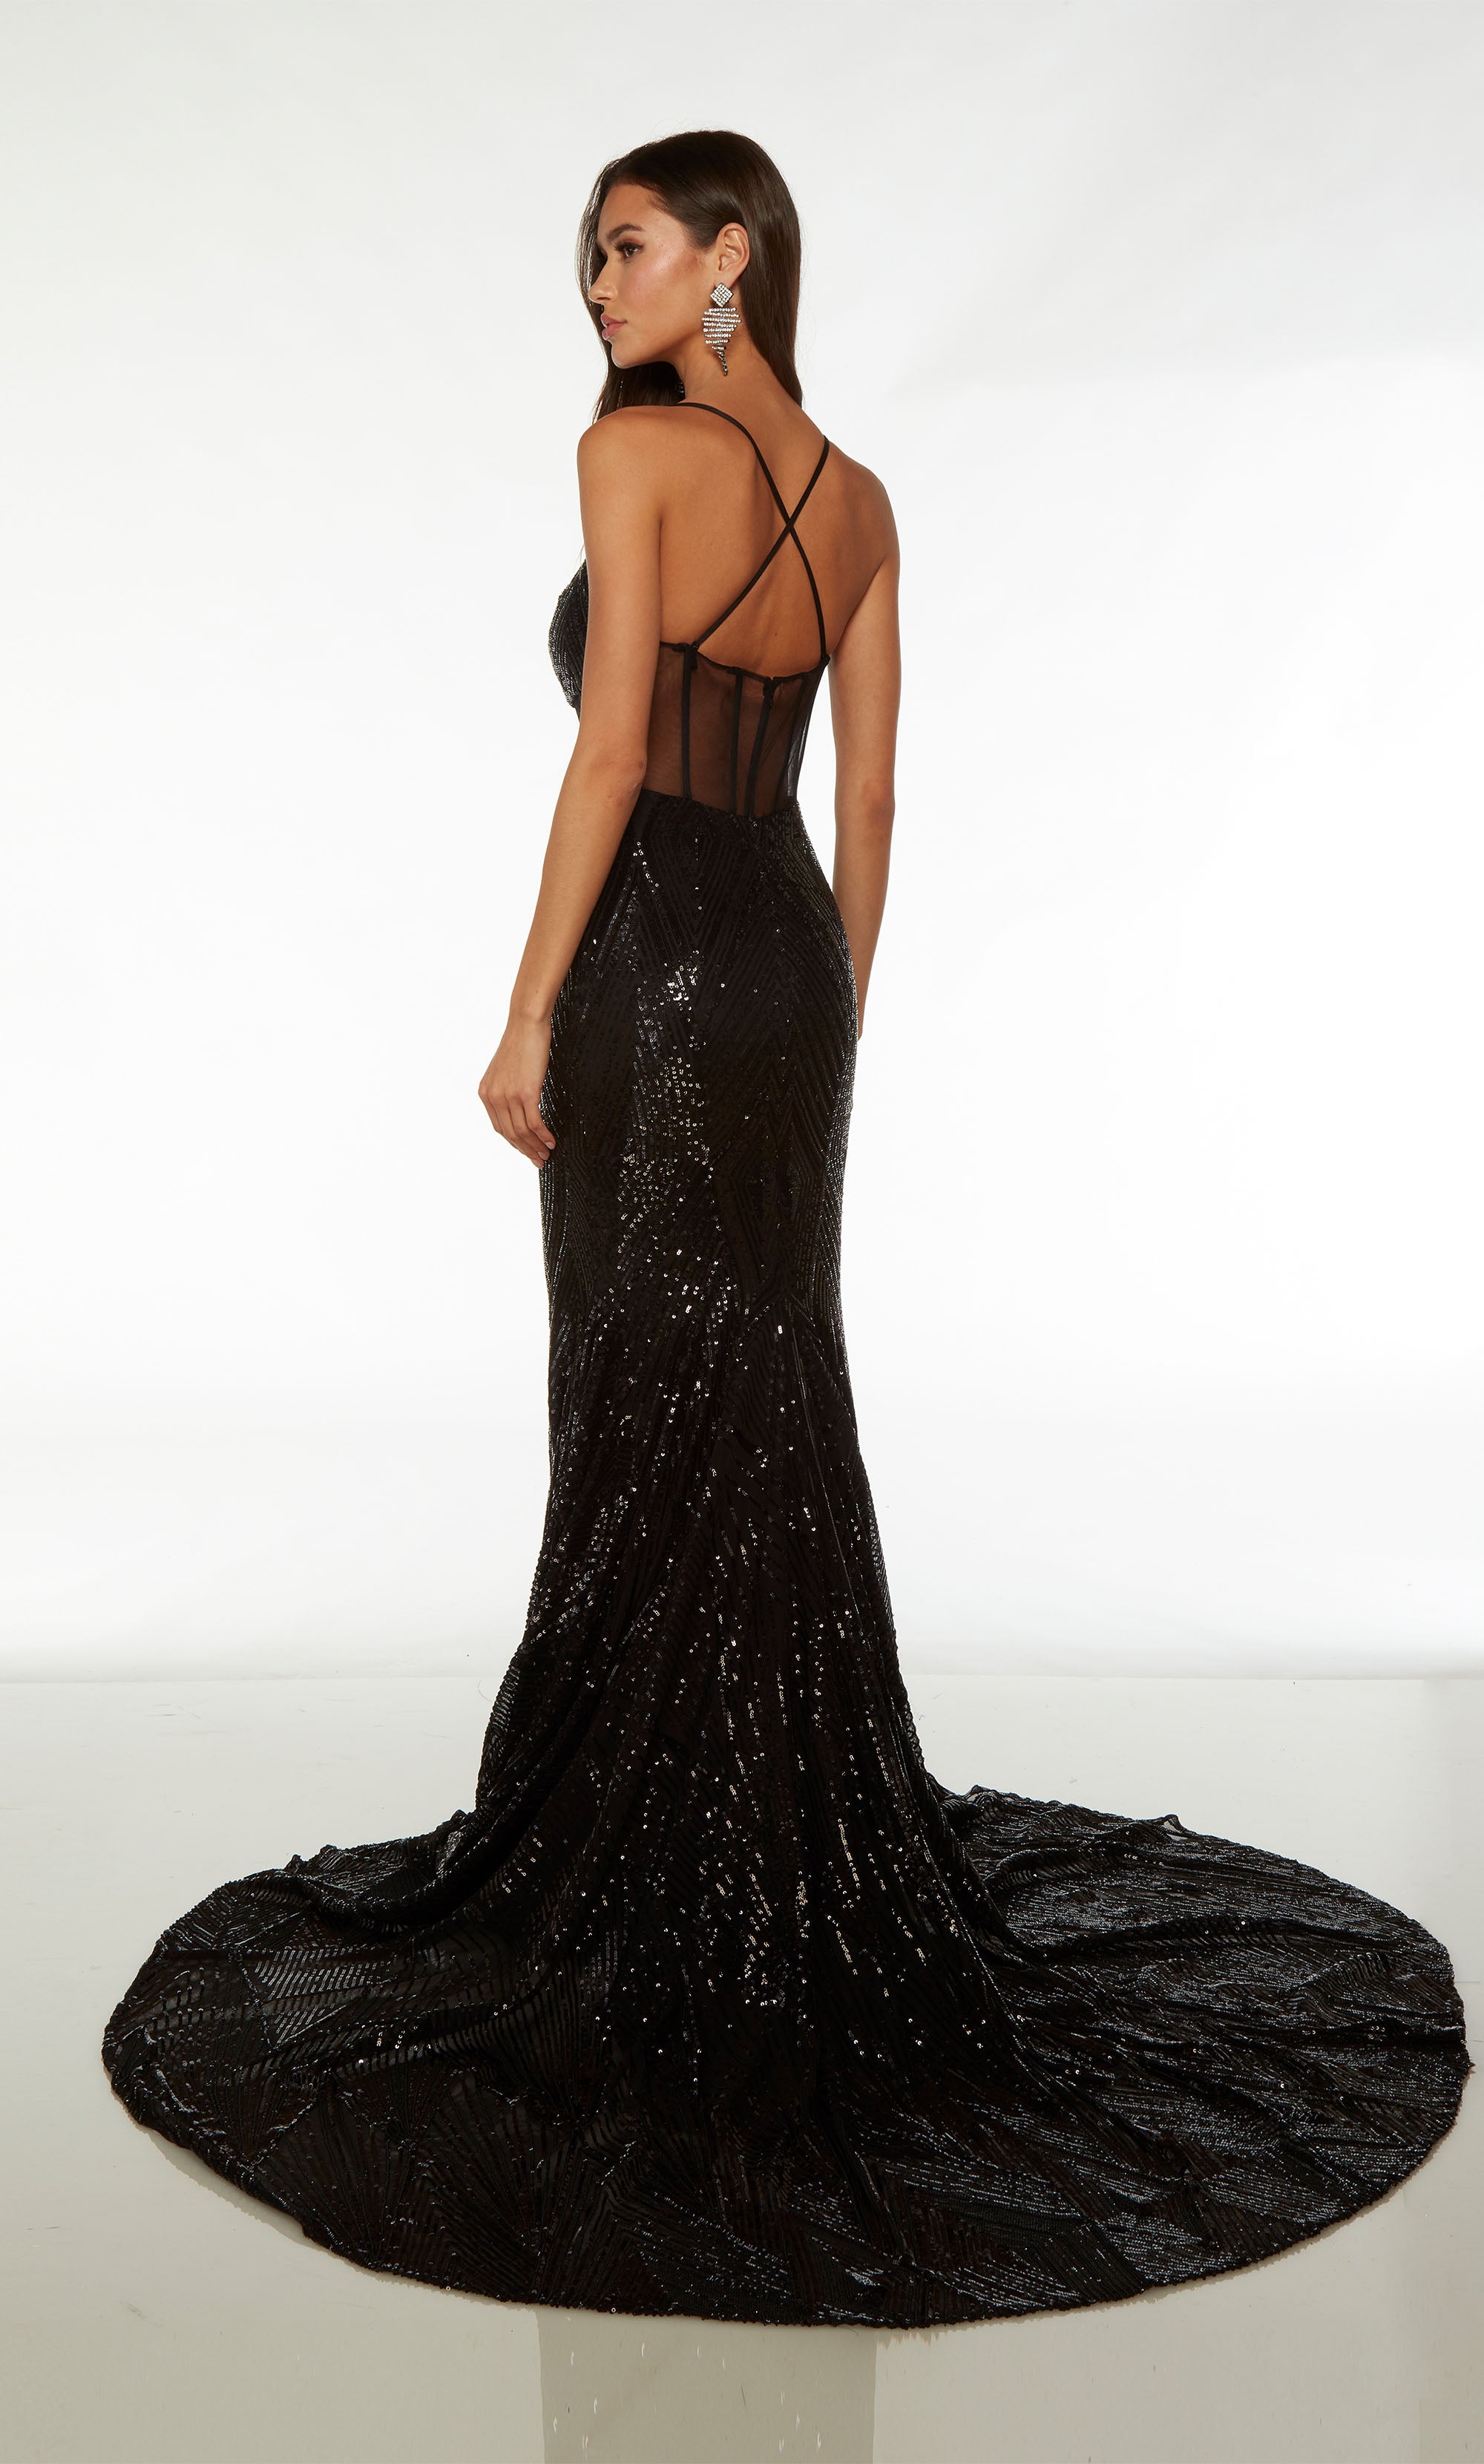 Formal Dress: 61186. Long Cut Out Dress, Scoop Neck, Straight